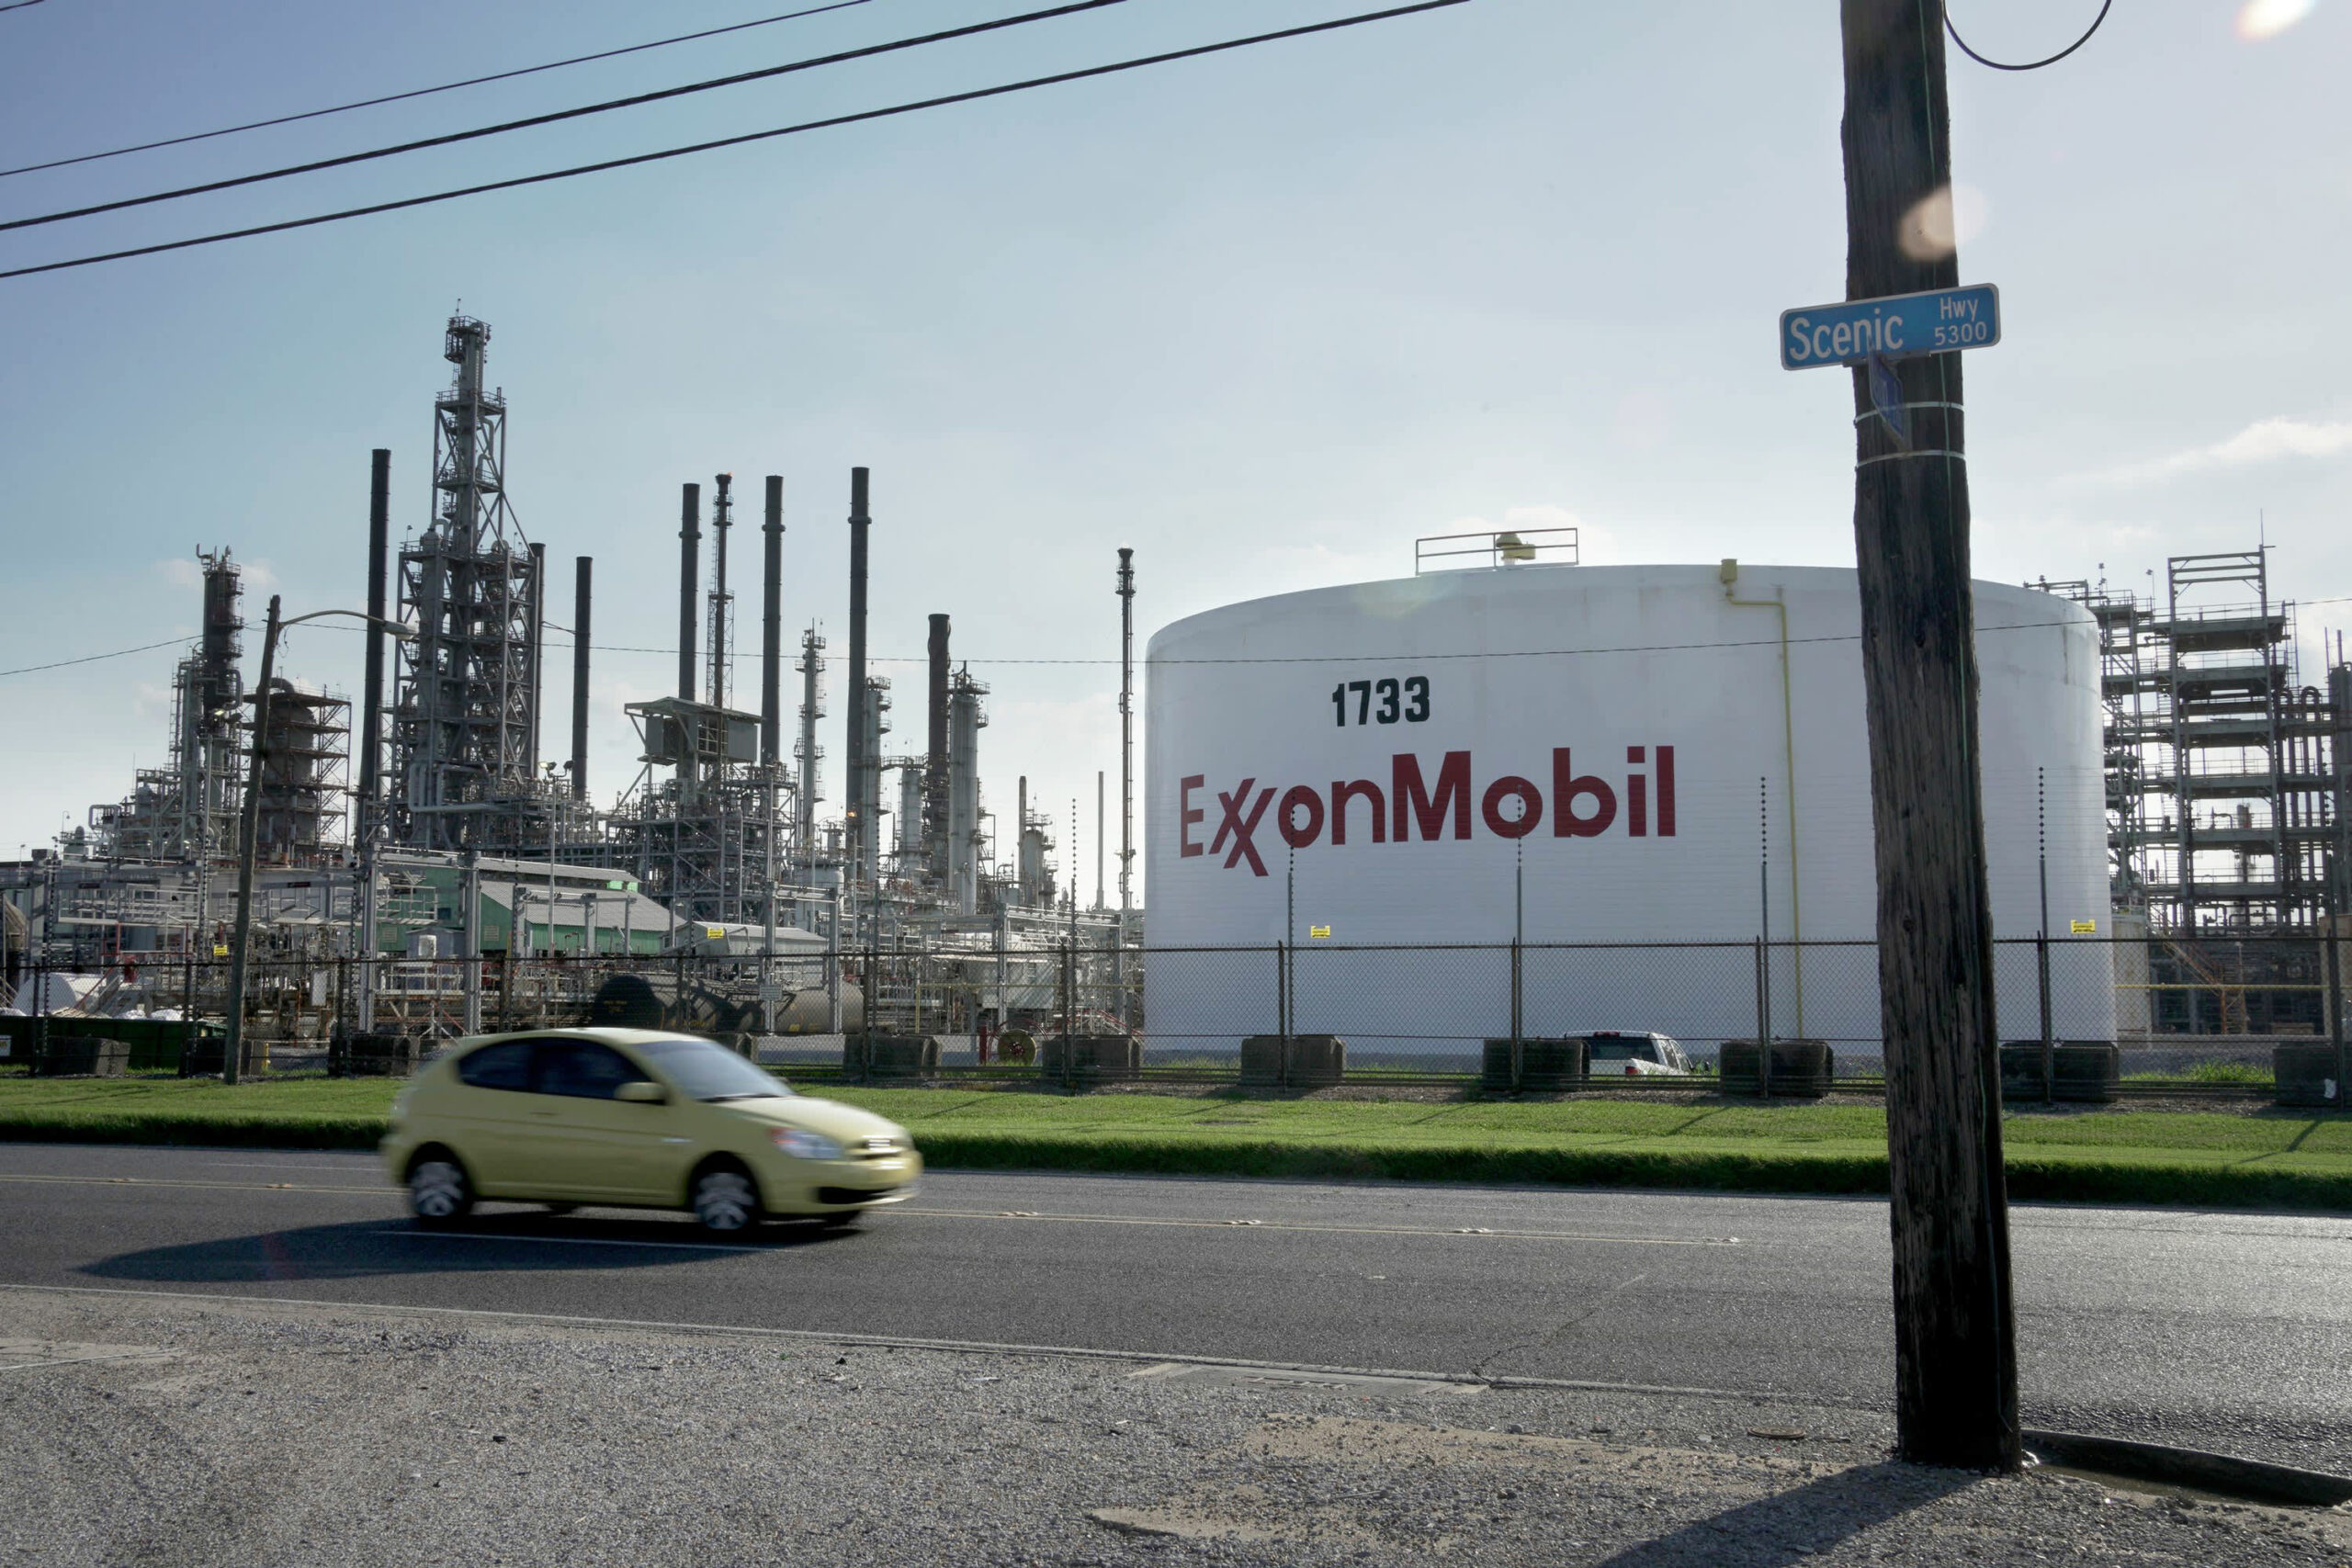 Underdog activist Engine No. 1 is launching an ETF after huge Exxon win